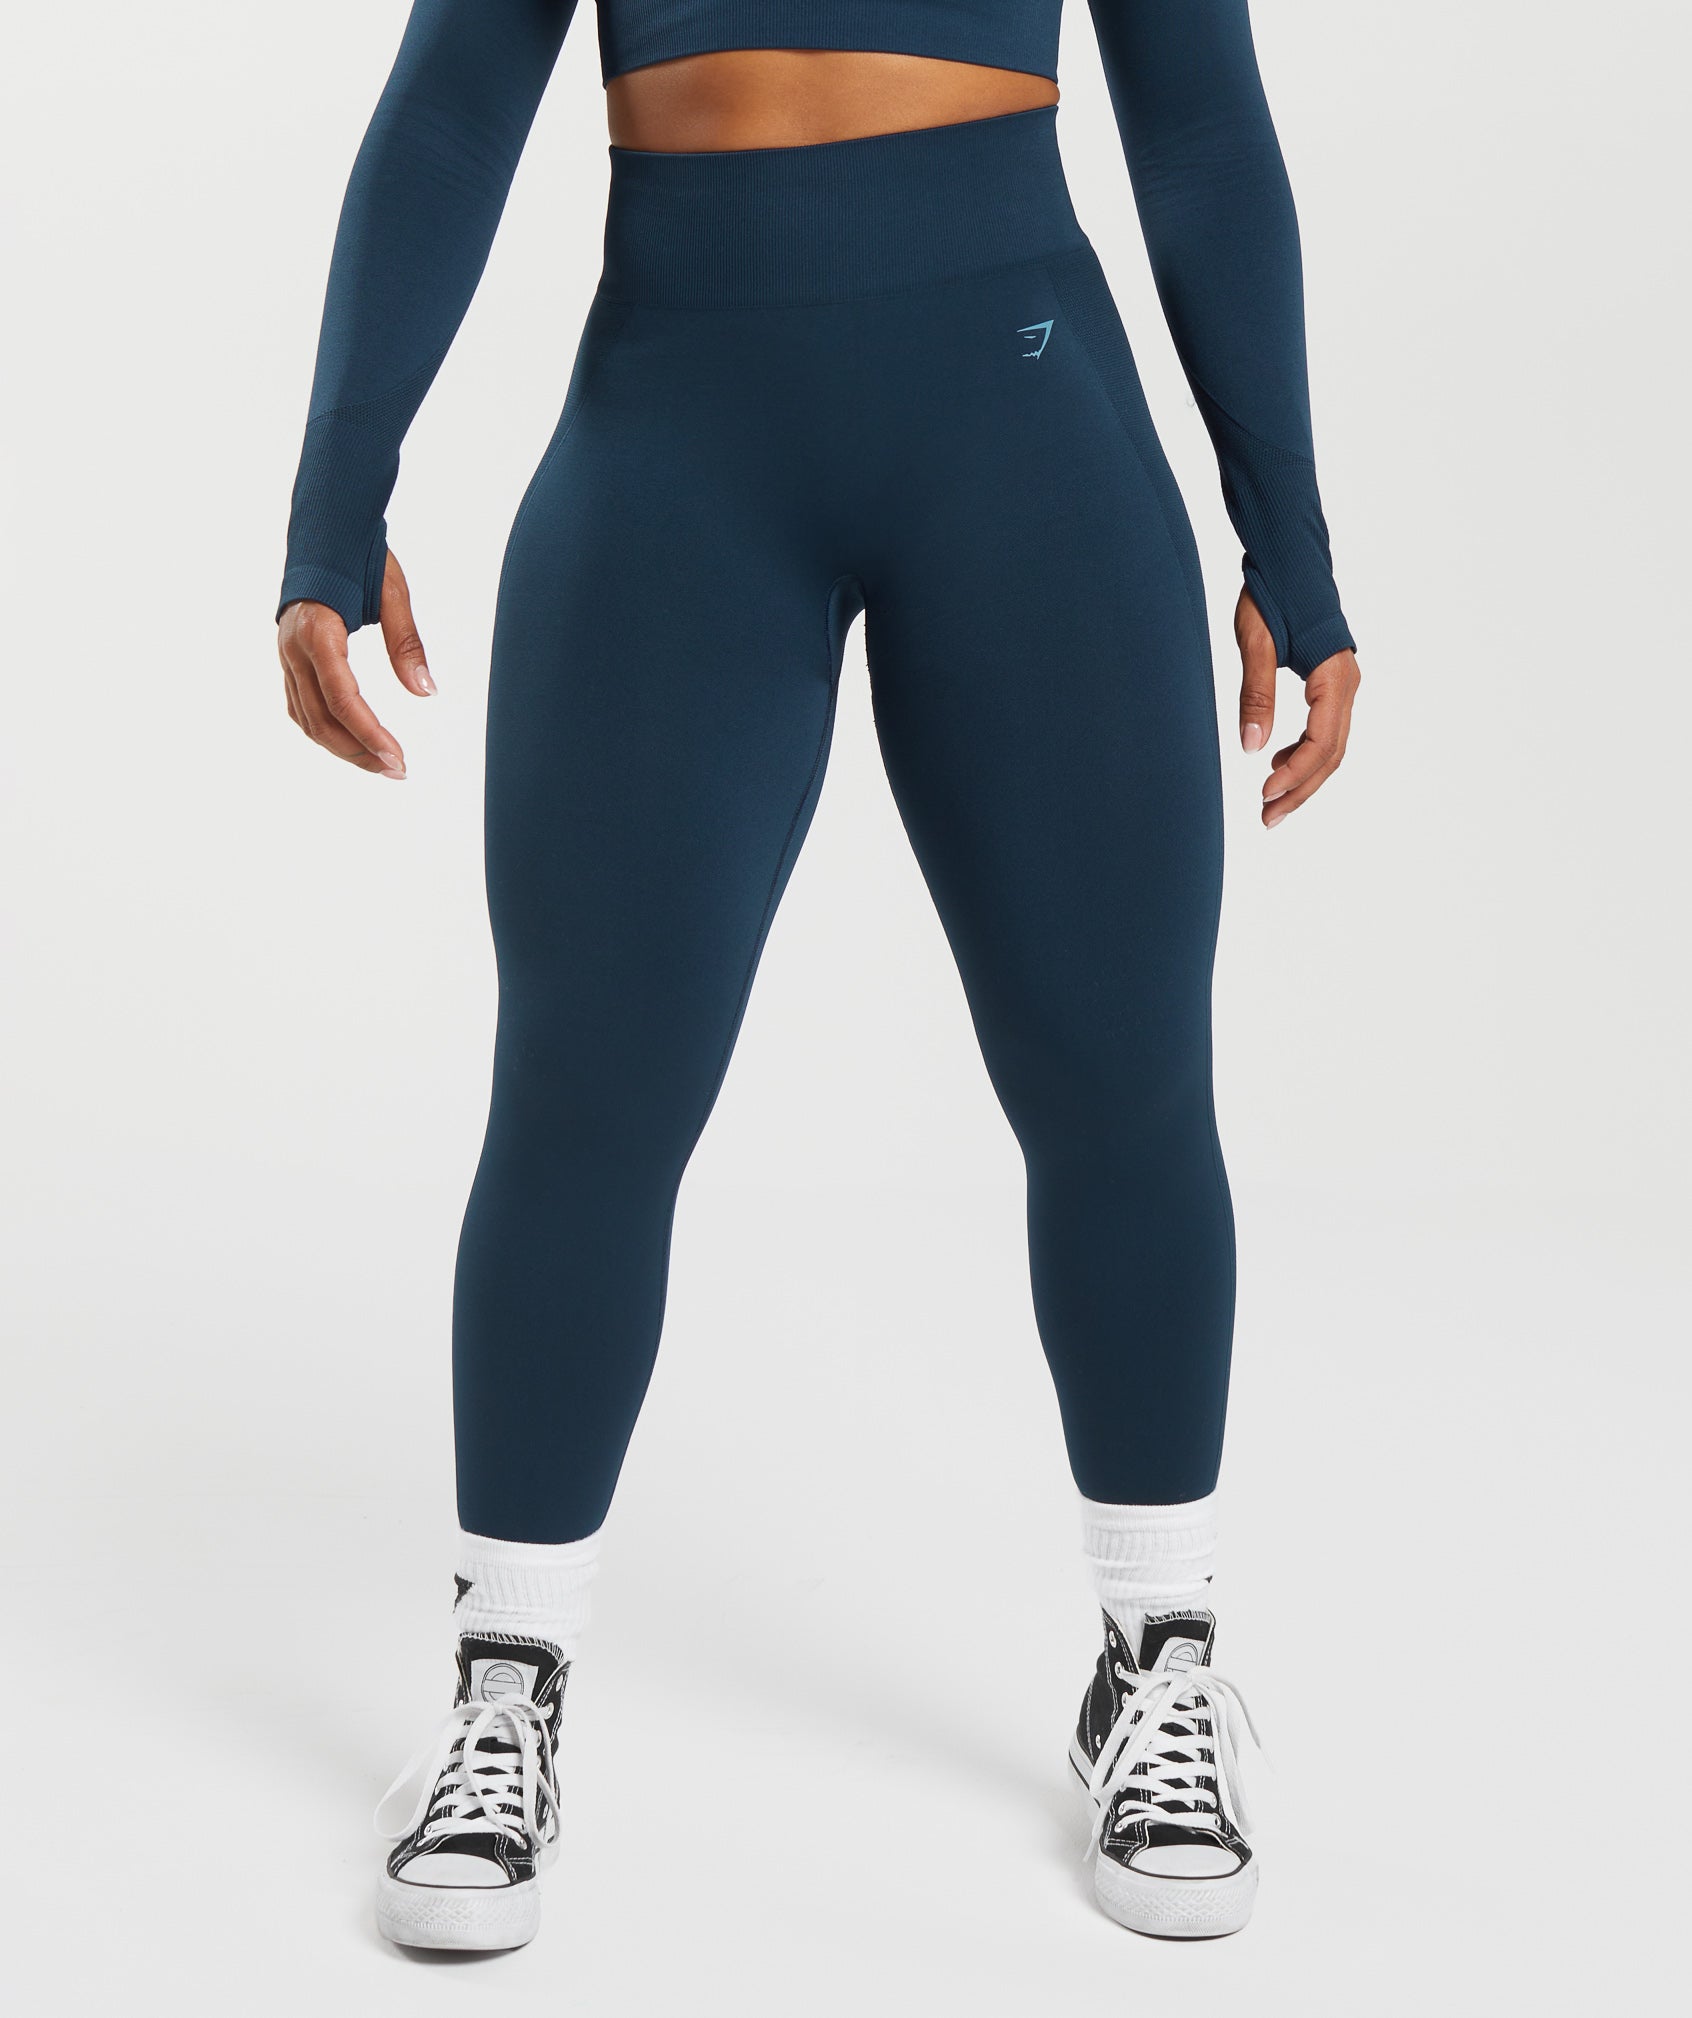 Avocado navy blue High rise compression leggings running yoga workout xs/s